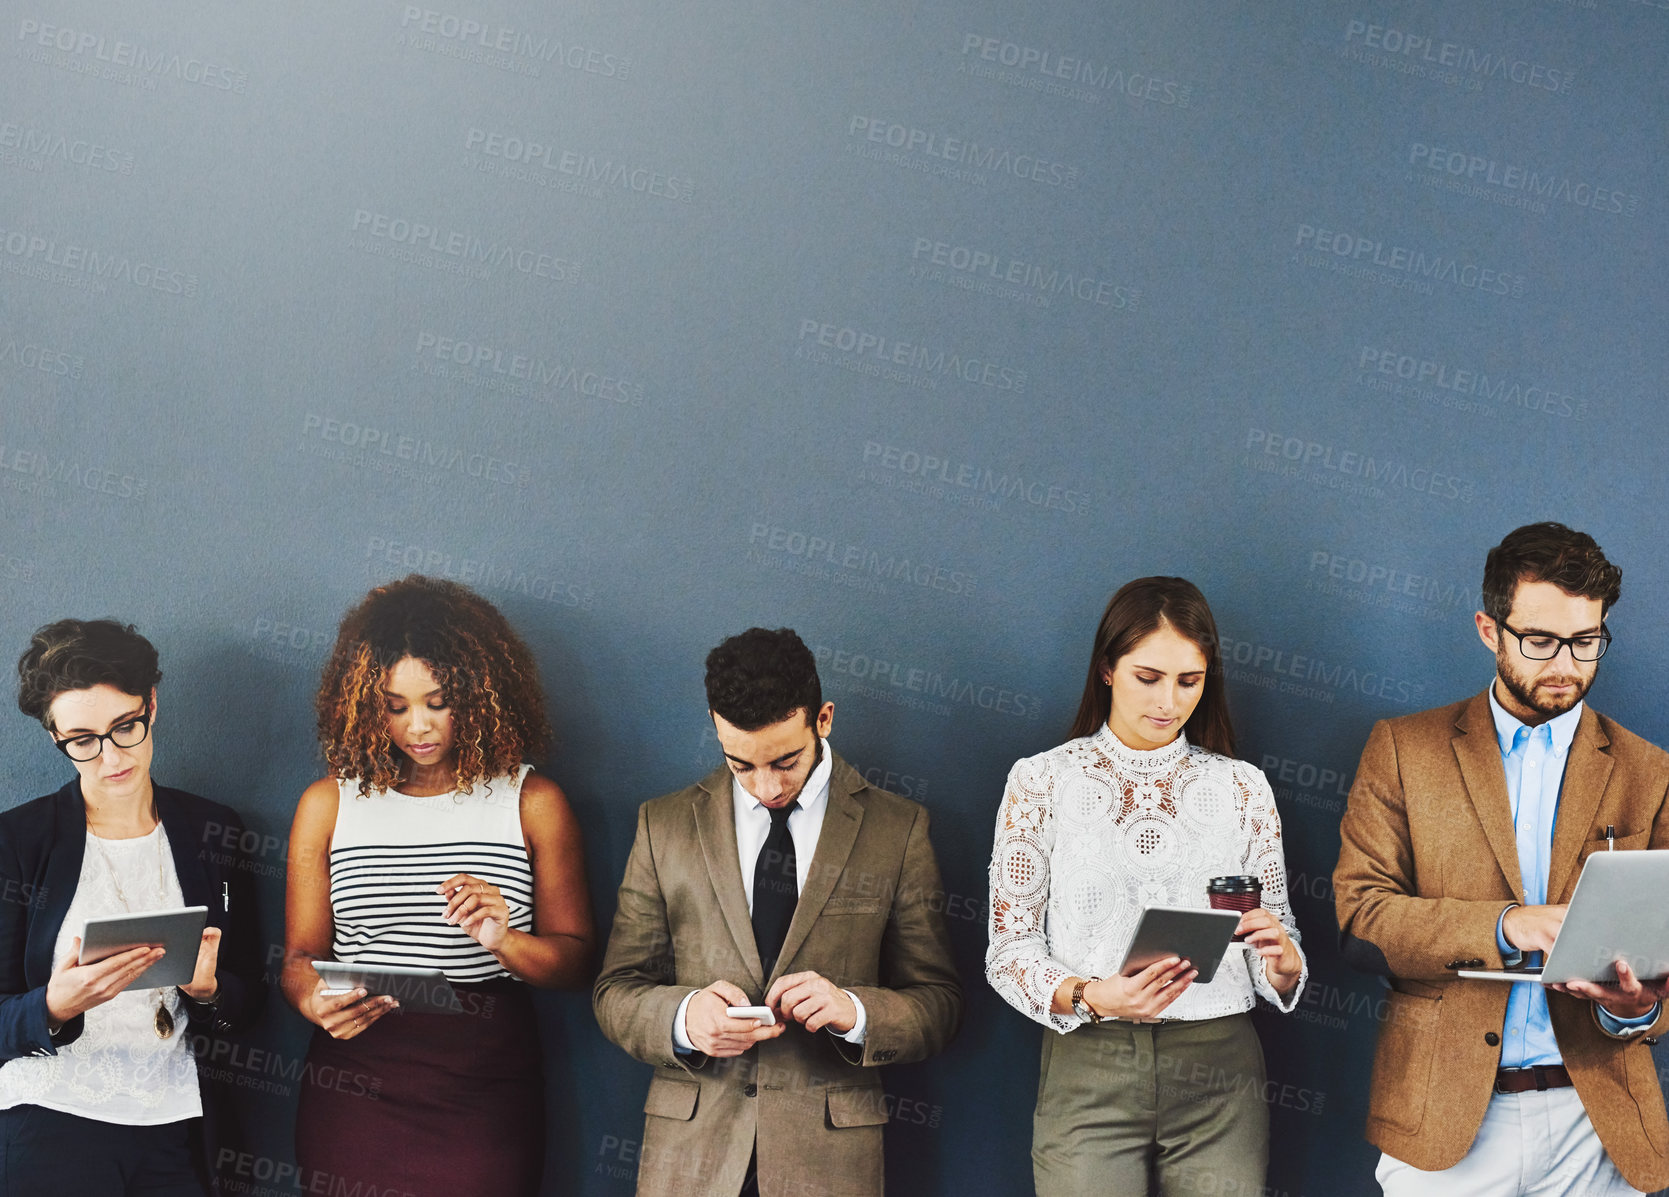 Buy stock photo Studio shot of a group of businesspeople using wireless technology while waiting in line against a gray background